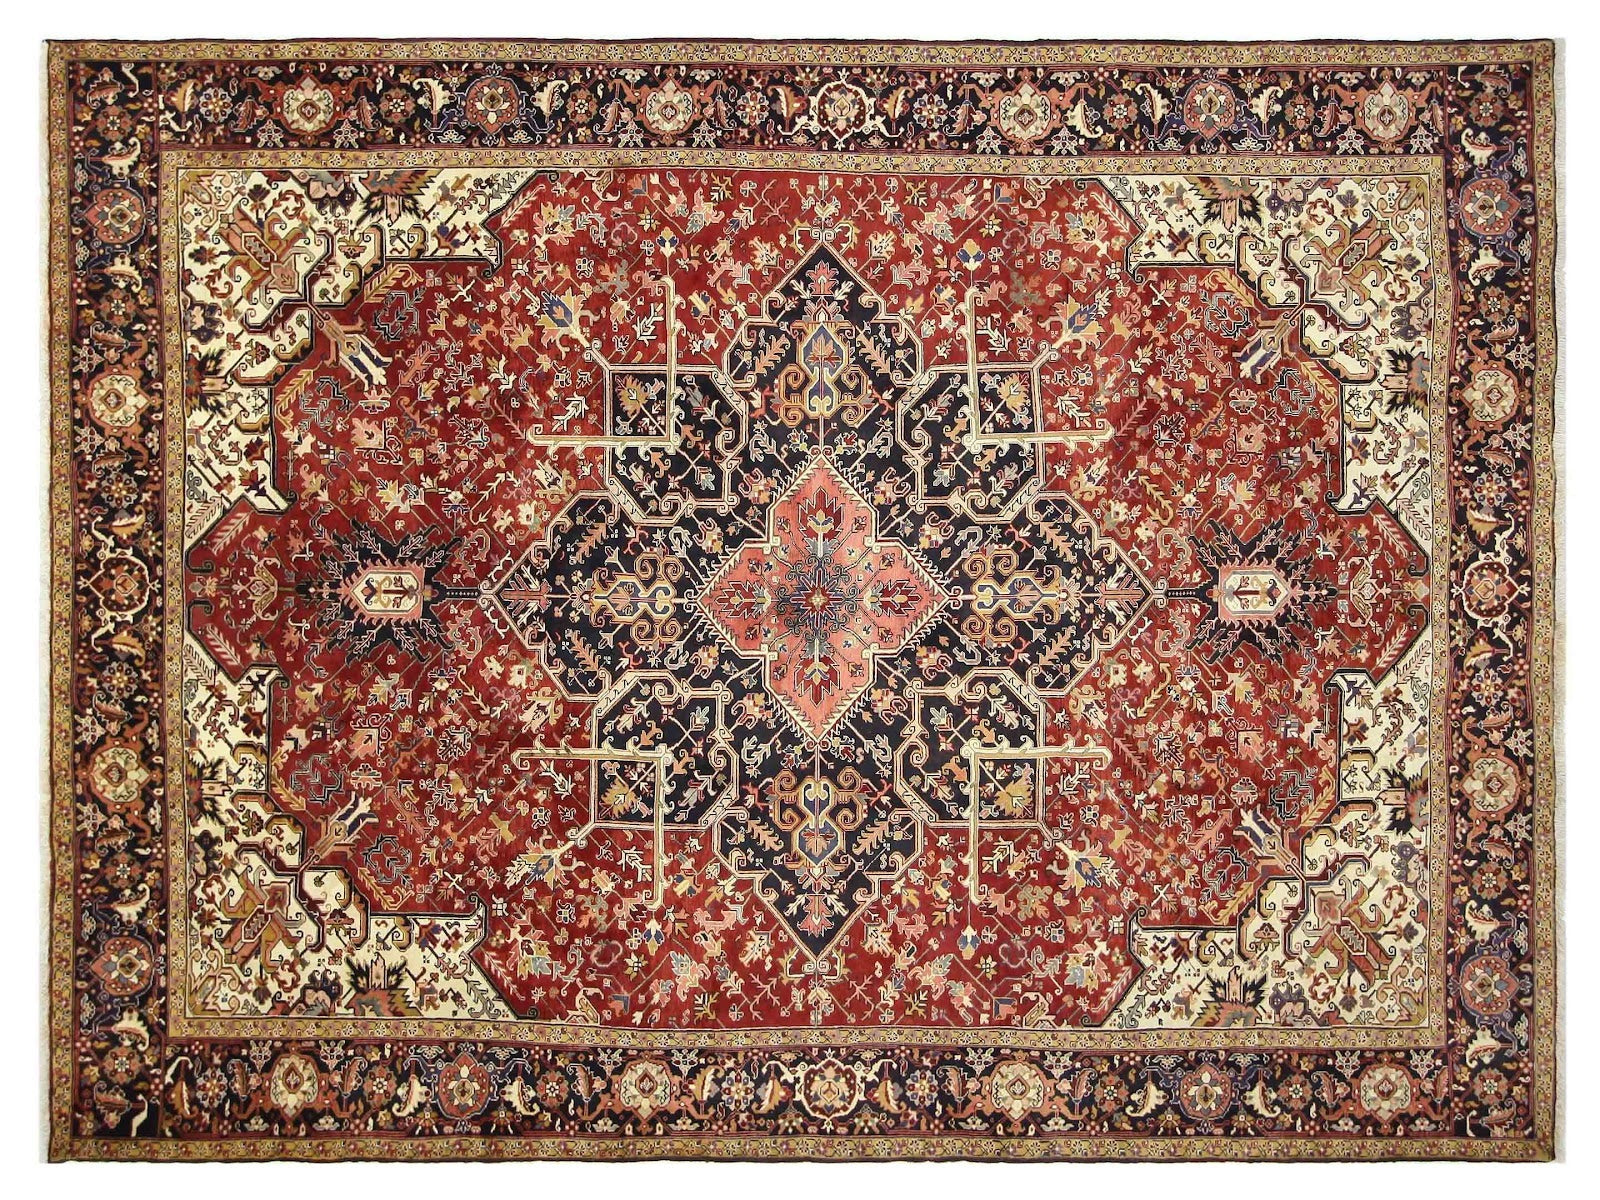 10x14 vintage Persian Serapi Heriz rug in navy with a red border and central medallion, hand-knotted in wool.